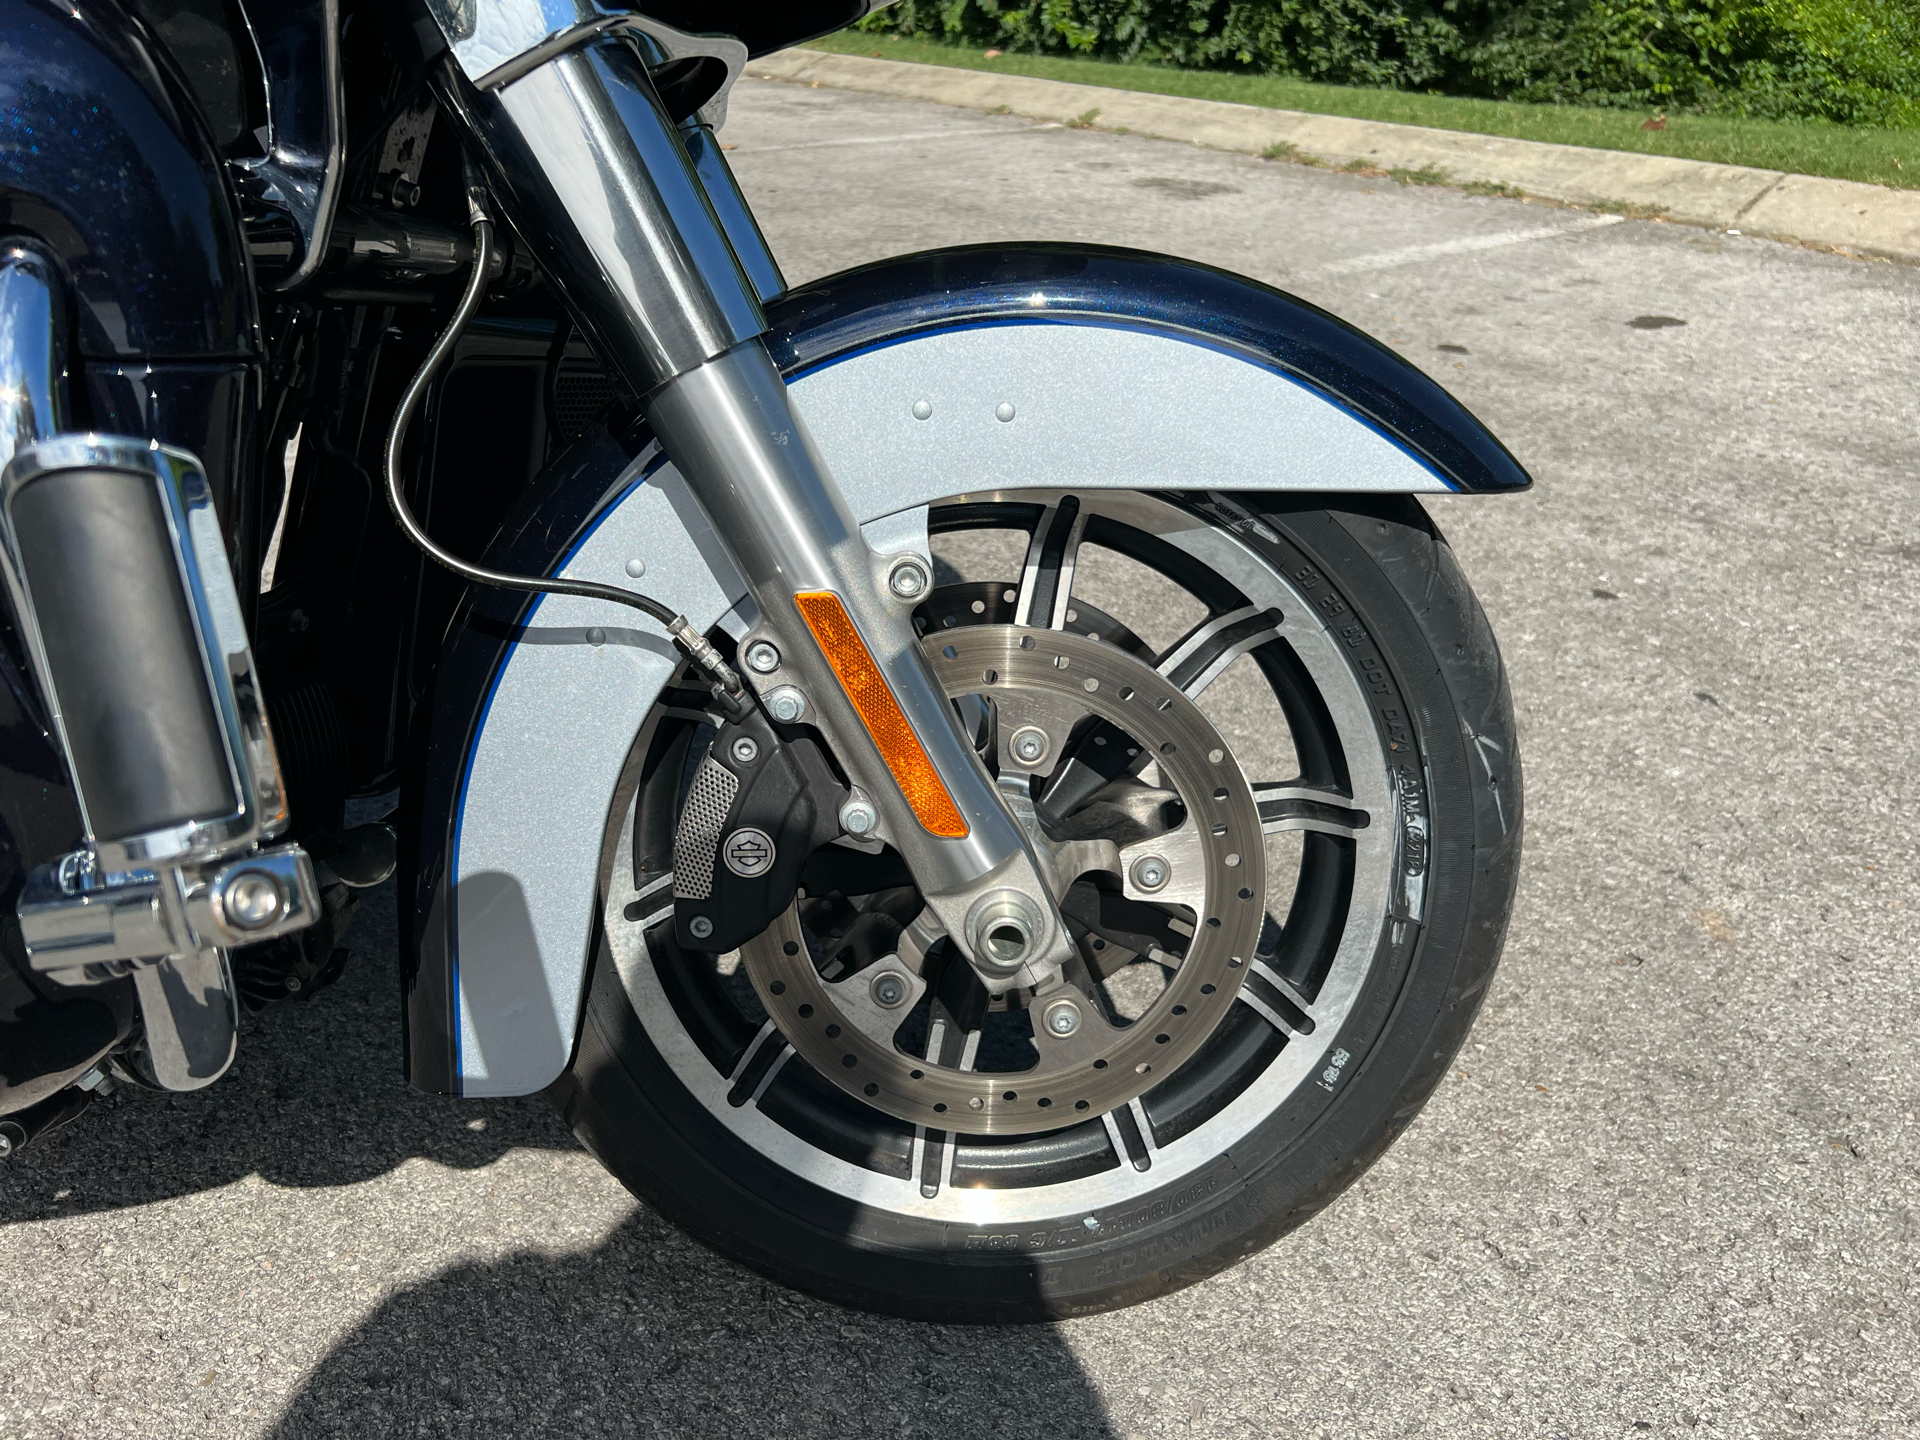 2019 Harley-Davidson Road Glide® Ultra in Franklin, Tennessee - Photo 3